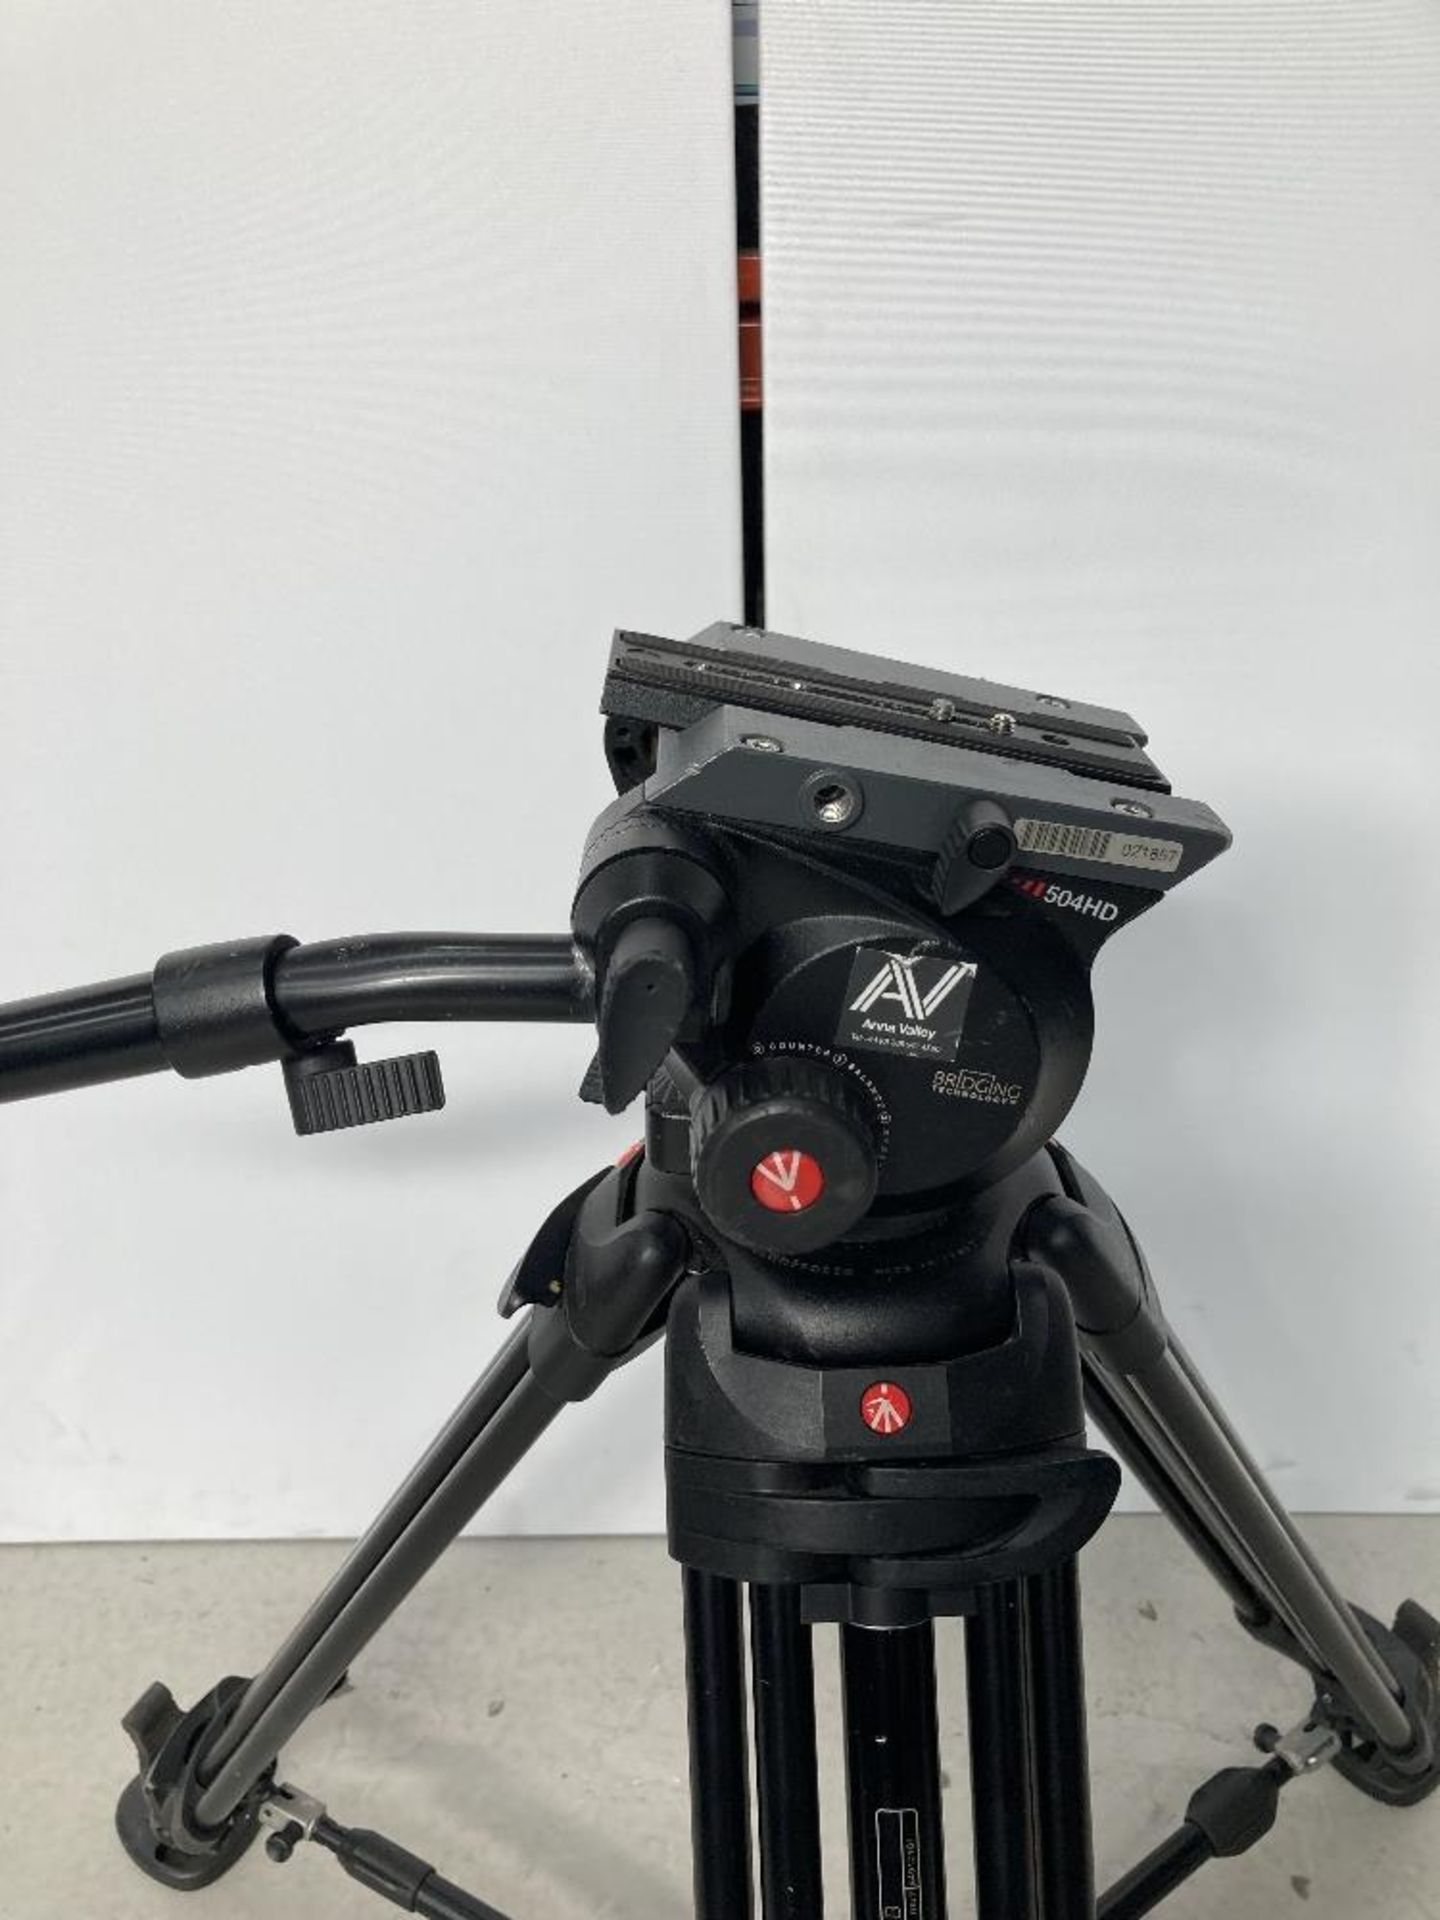 Manfrotto 504HD Tripod Head and 546B Tripod with Carbon Fibre Legs with Manfrotto Carry Case - Image 5 of 6